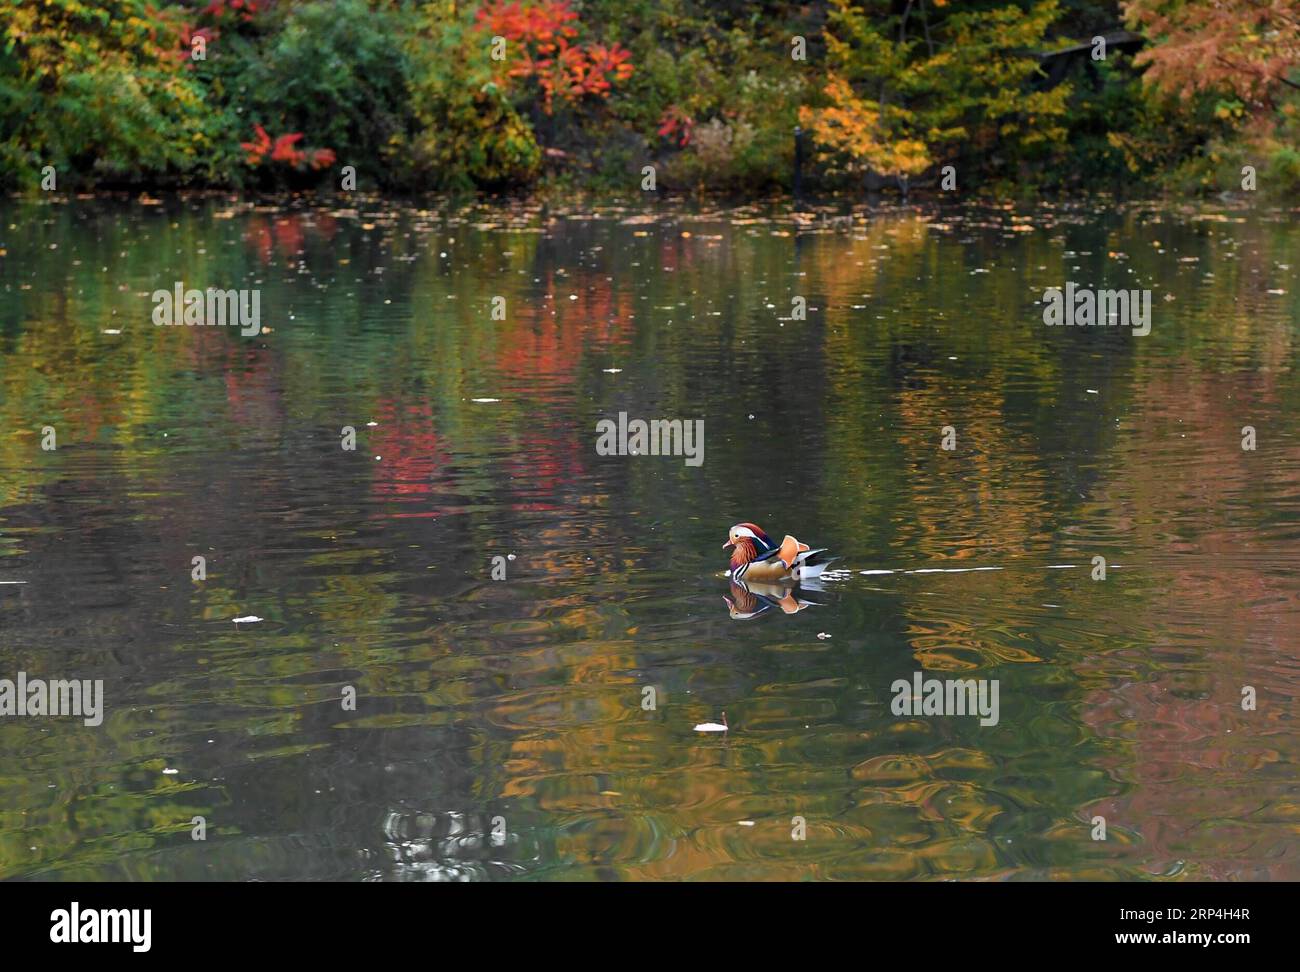 (181109) -- NEW YORK, Nov. 9, 2018 -- A Mandarin duck paddles on a pond at the Central Park in New York, the United States, on Nov. 8, 2018. Mandarin ducks are native to East Asia and renowned for their dazzling multicolored feathers. This rare Mandarin duck, first spotted in early October, has become a new star at the Central Park, one of New York City s most-visited attractions. ) (yk) U.S.-NEW YORK-MANDARIN DUCK LixRui PUBLICATIONxNOTxINxCHN Stock Photo